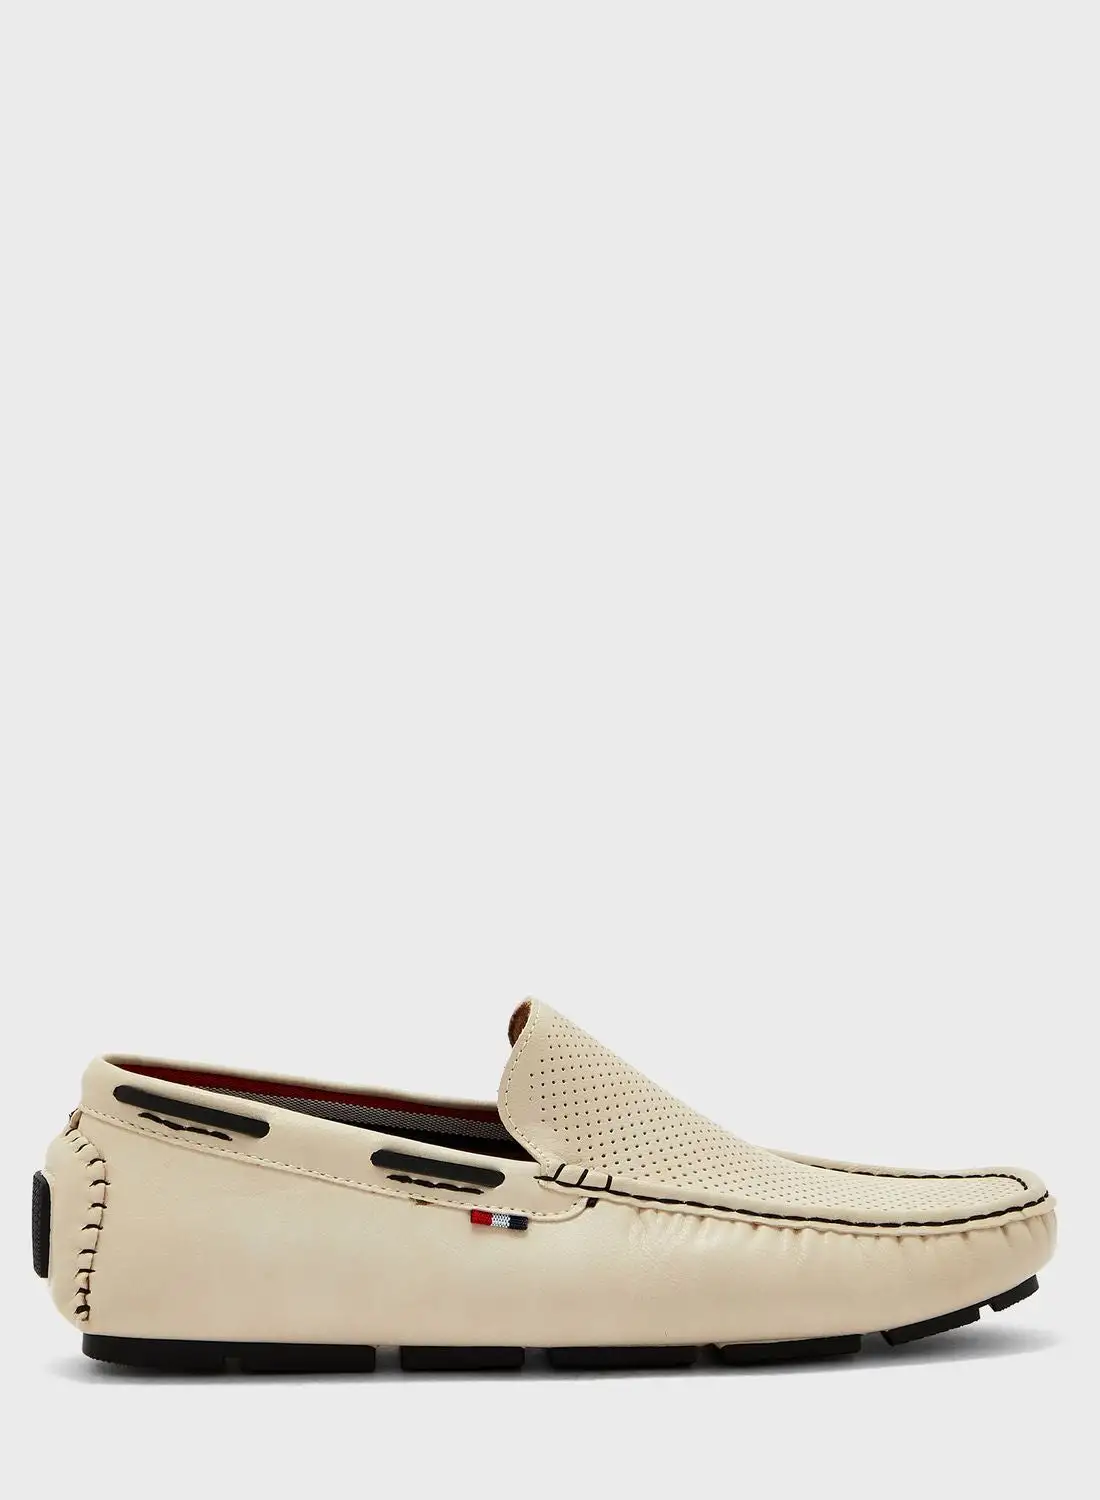 Robert Wood Webbing Highlight Perforation Texture Loafers